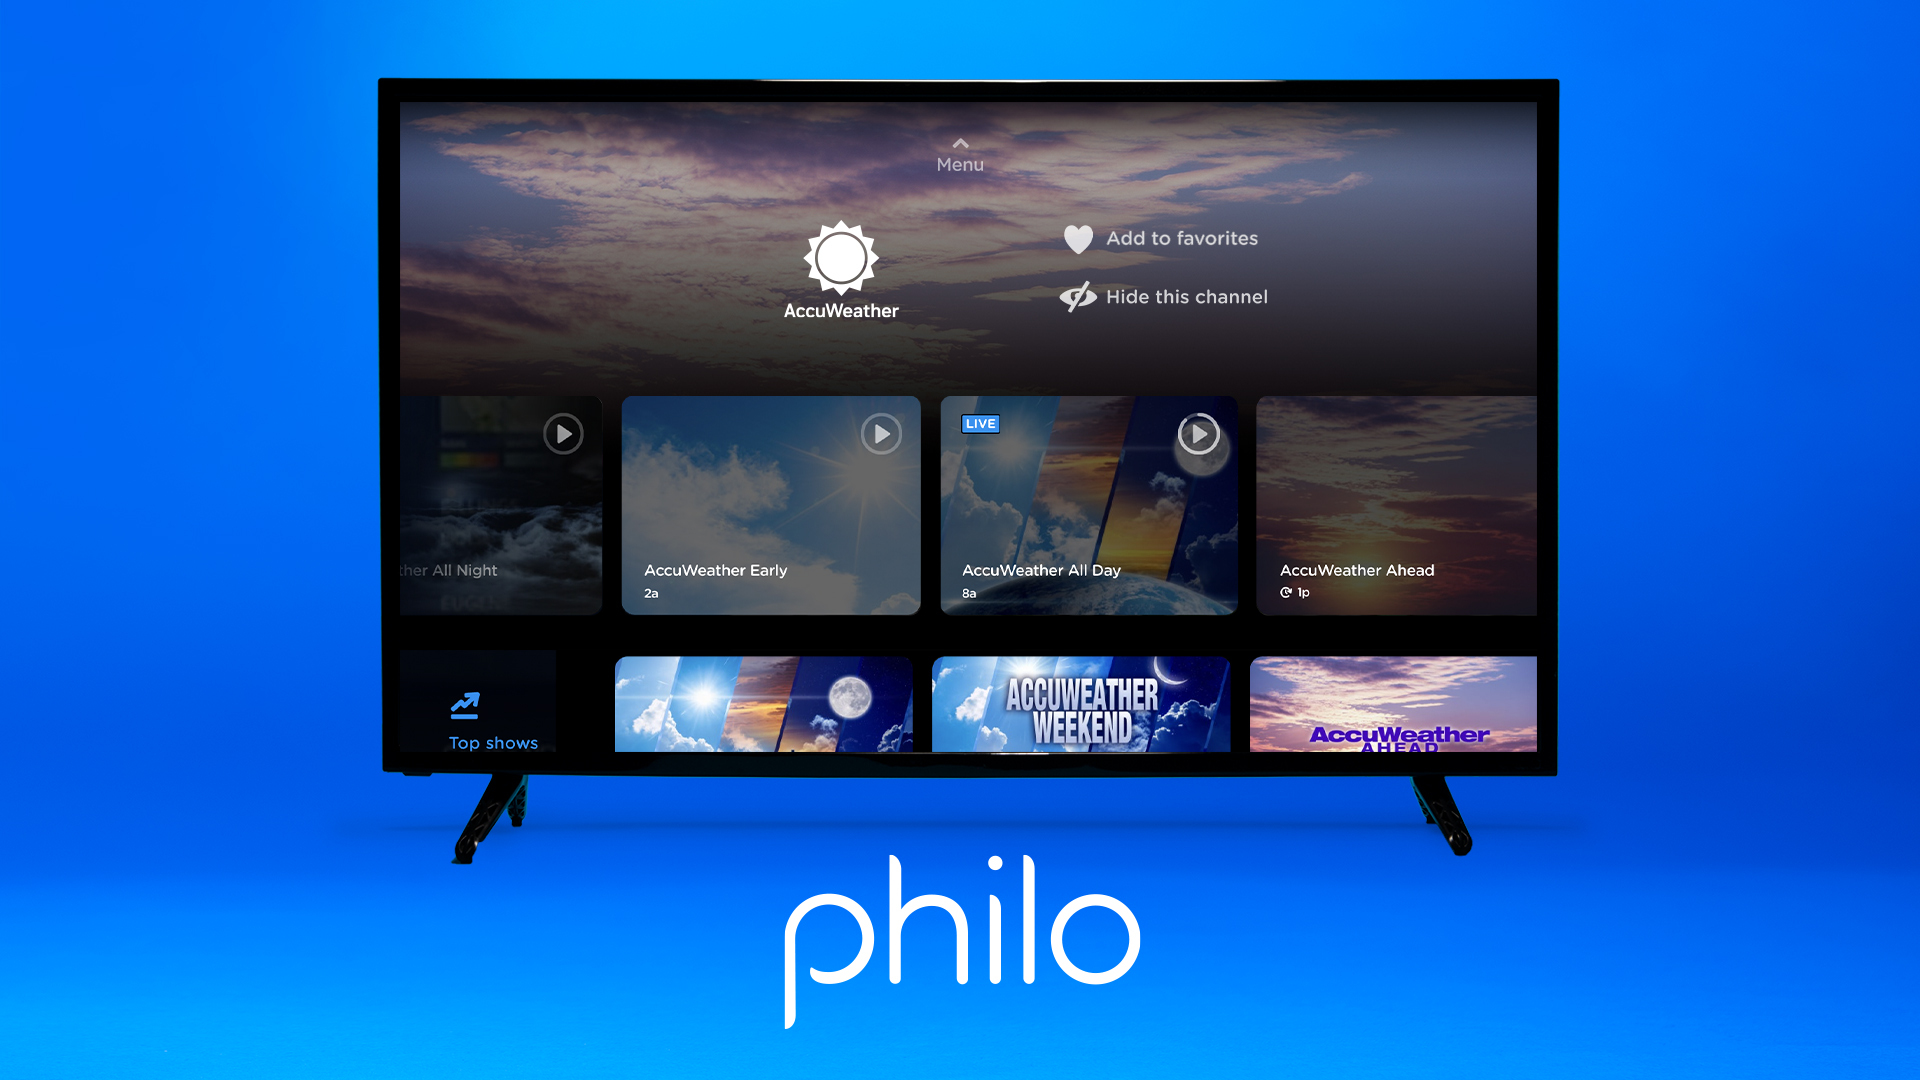 Philo Launches AccuWeather Providing Up-to-the-Minute Weather Reporting to Its Popular Entertainment-Focused Streaming Service Business Wire